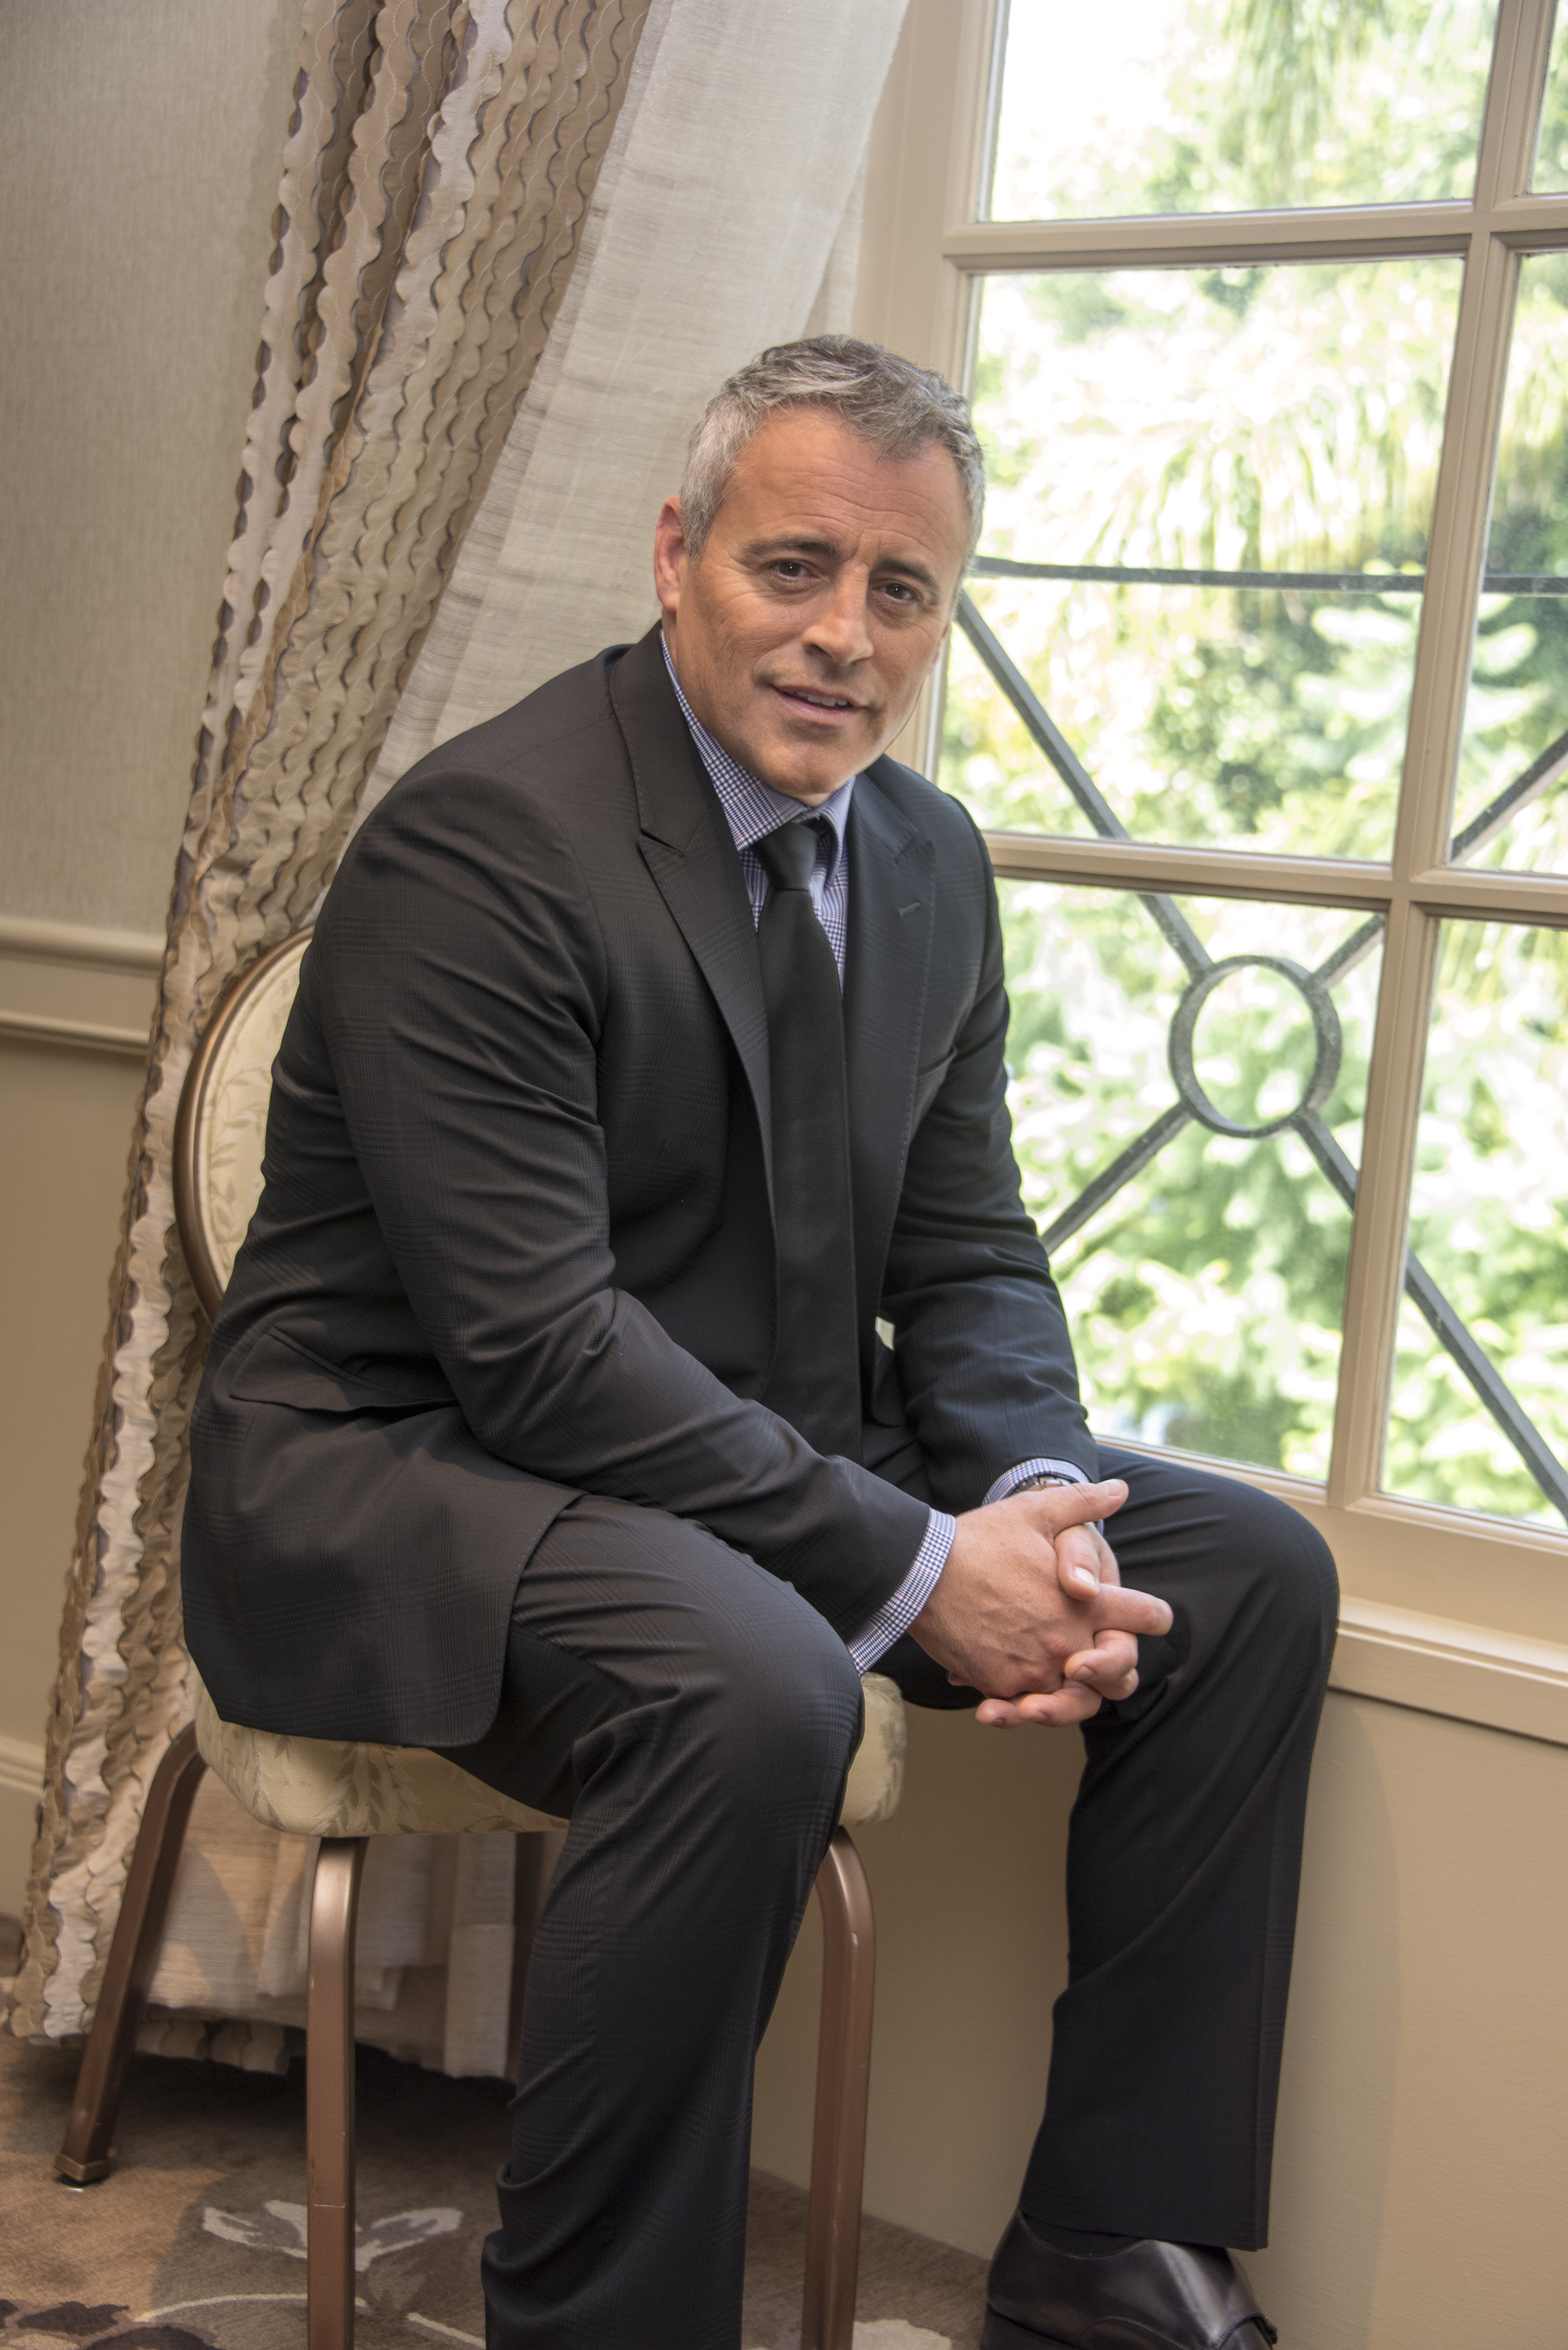 Matt LeBlanc at the press conference for "Episodes" in Beverly Hills, California on August 7, 2017 | Source: Getty Images